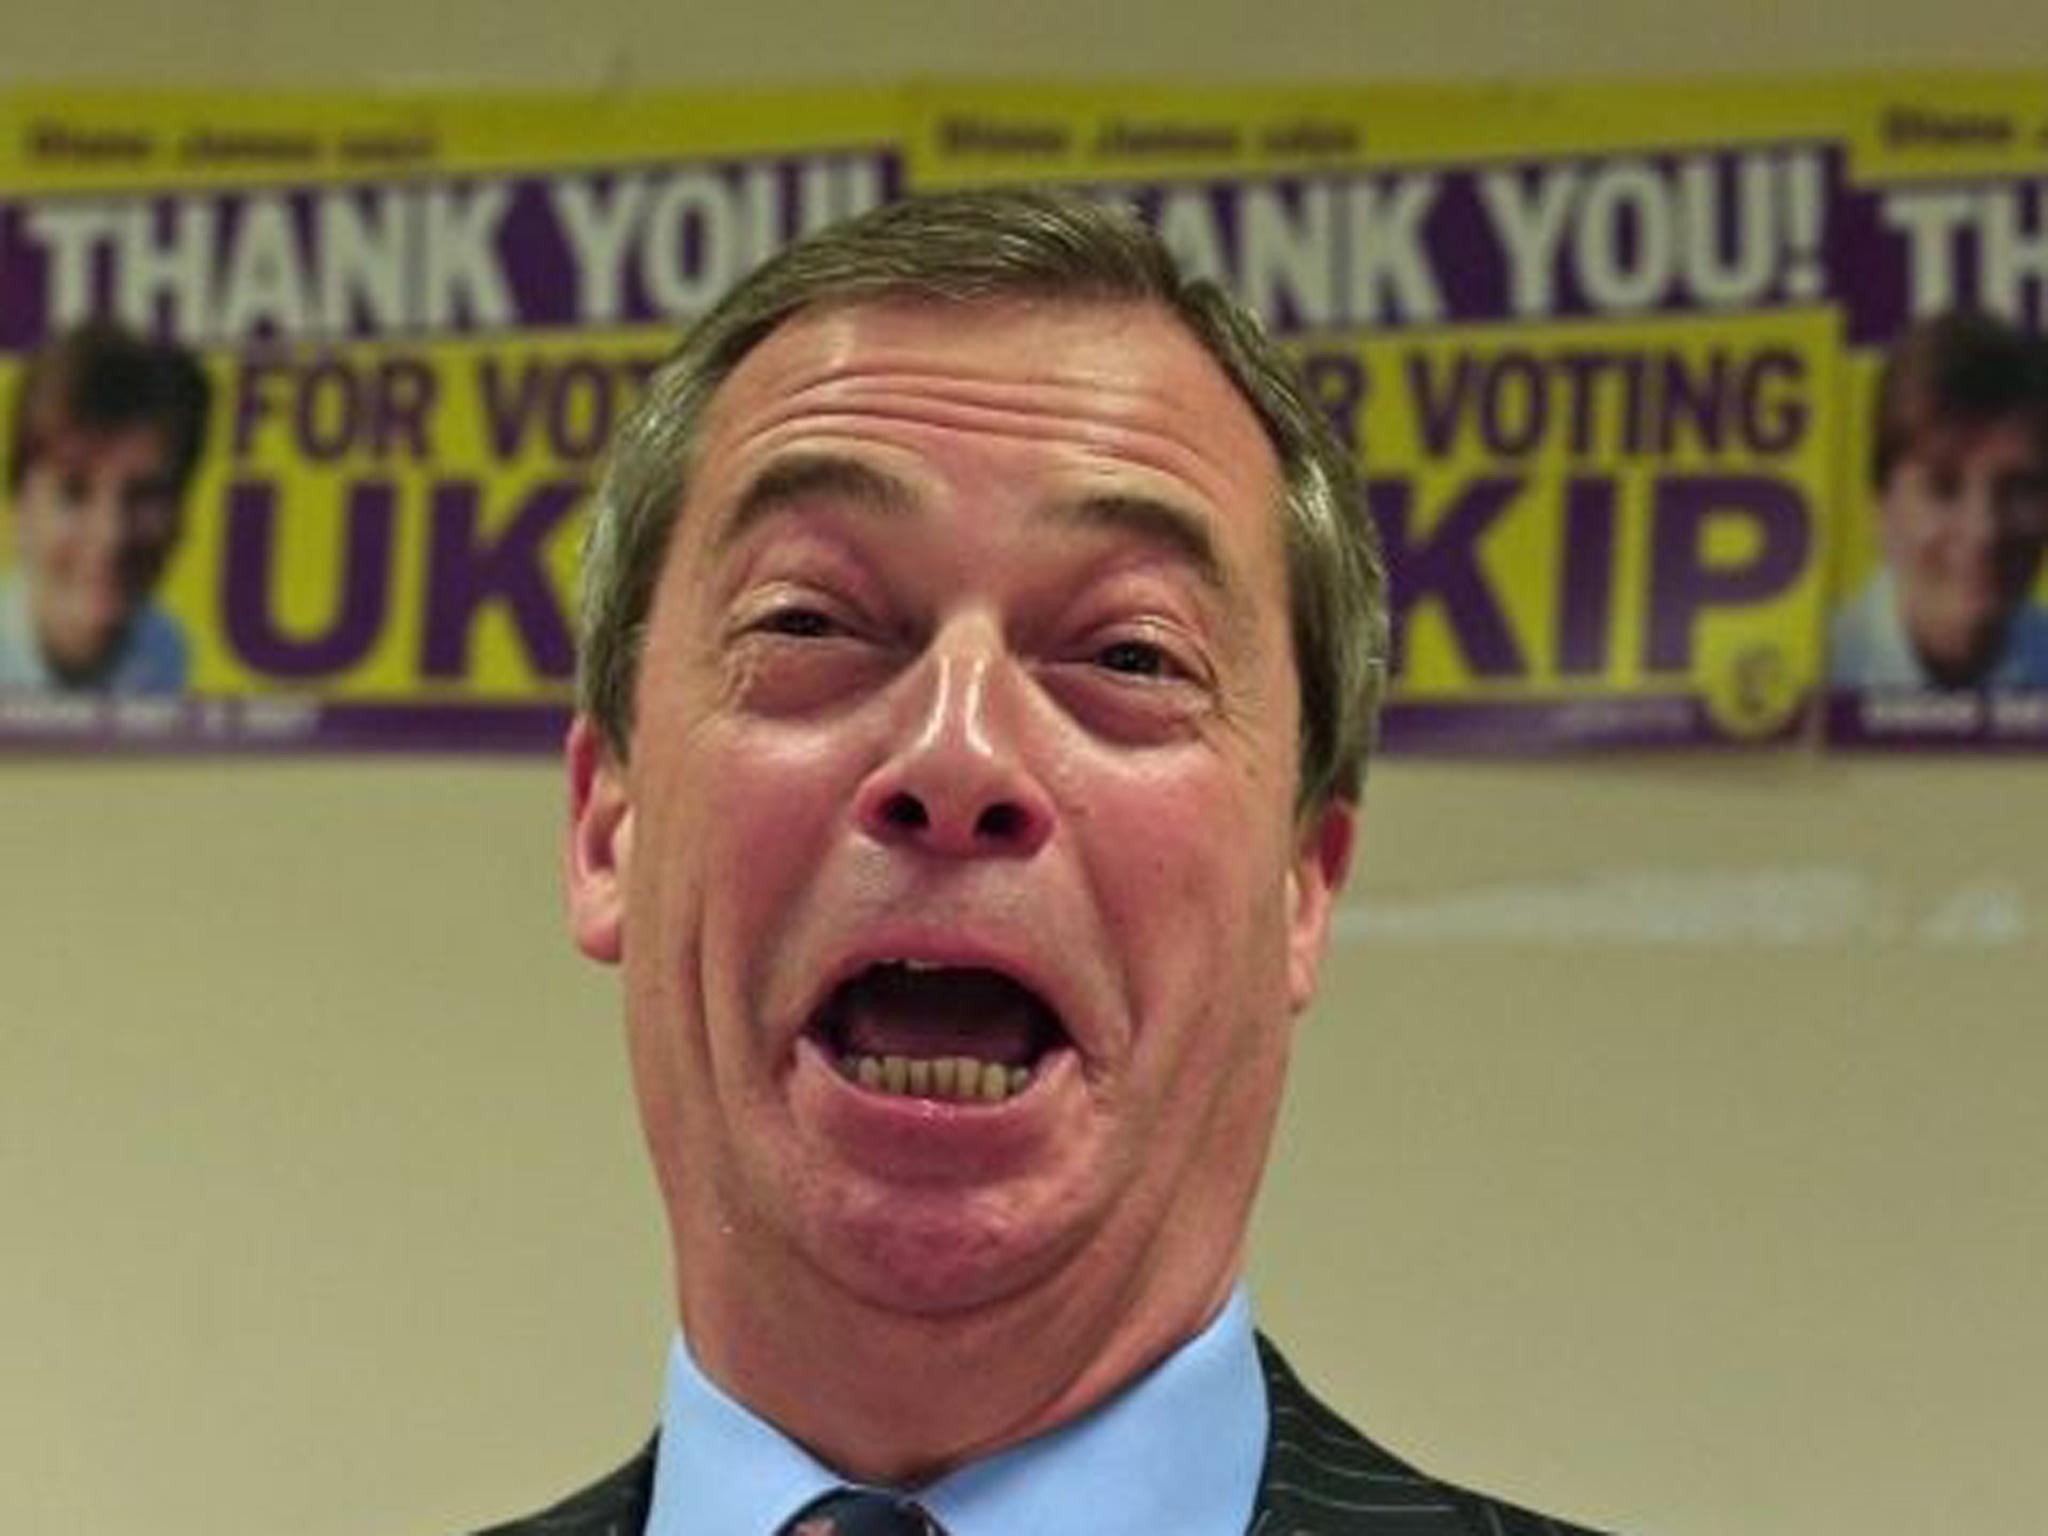 Ukip leader Nigel Farage in laughjing mood after the by-election result in Eastleigh, Hampshire